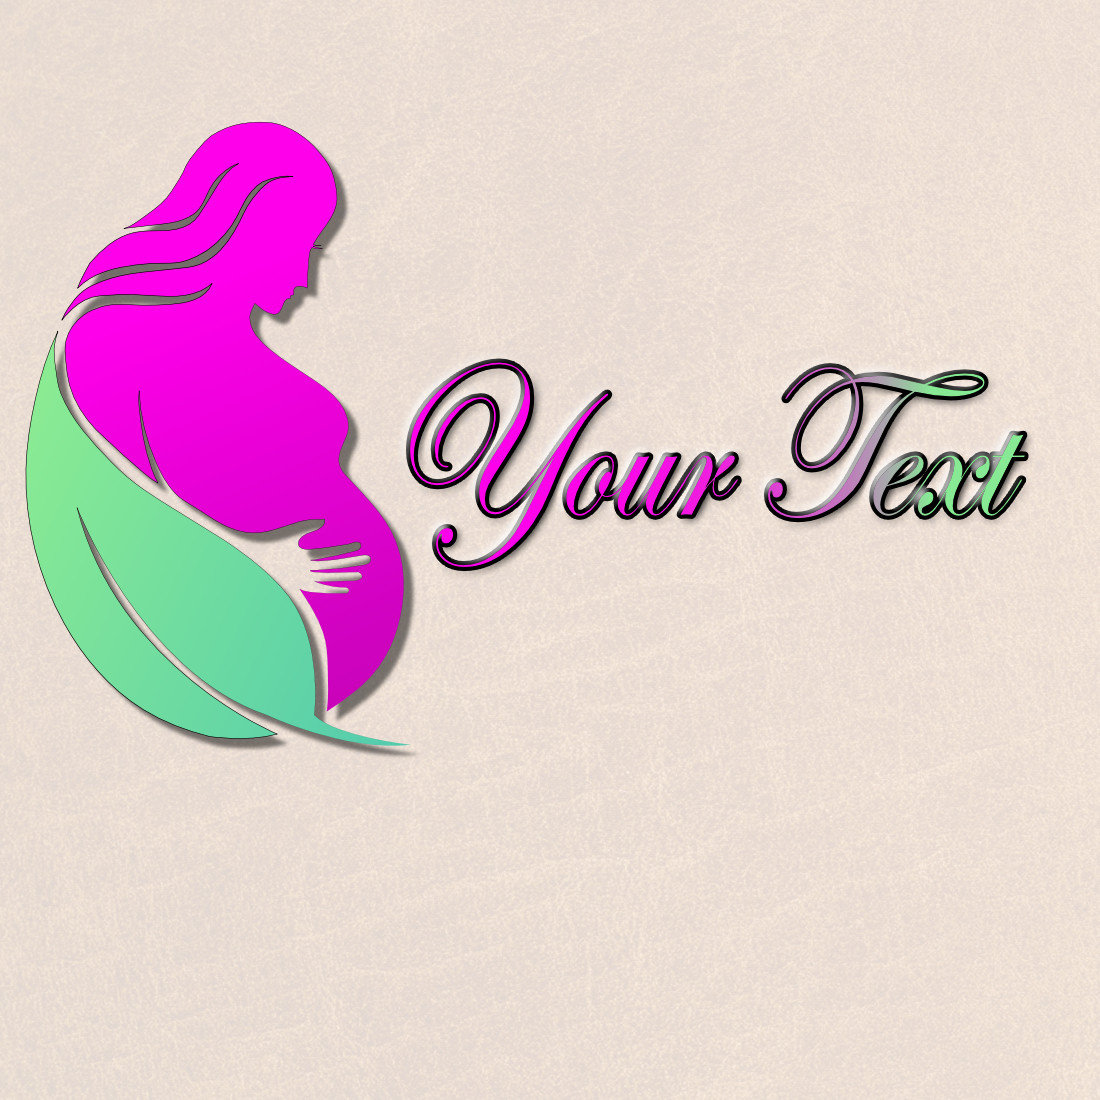 The logo depicts a stylized image of a pregnant woman cover image.